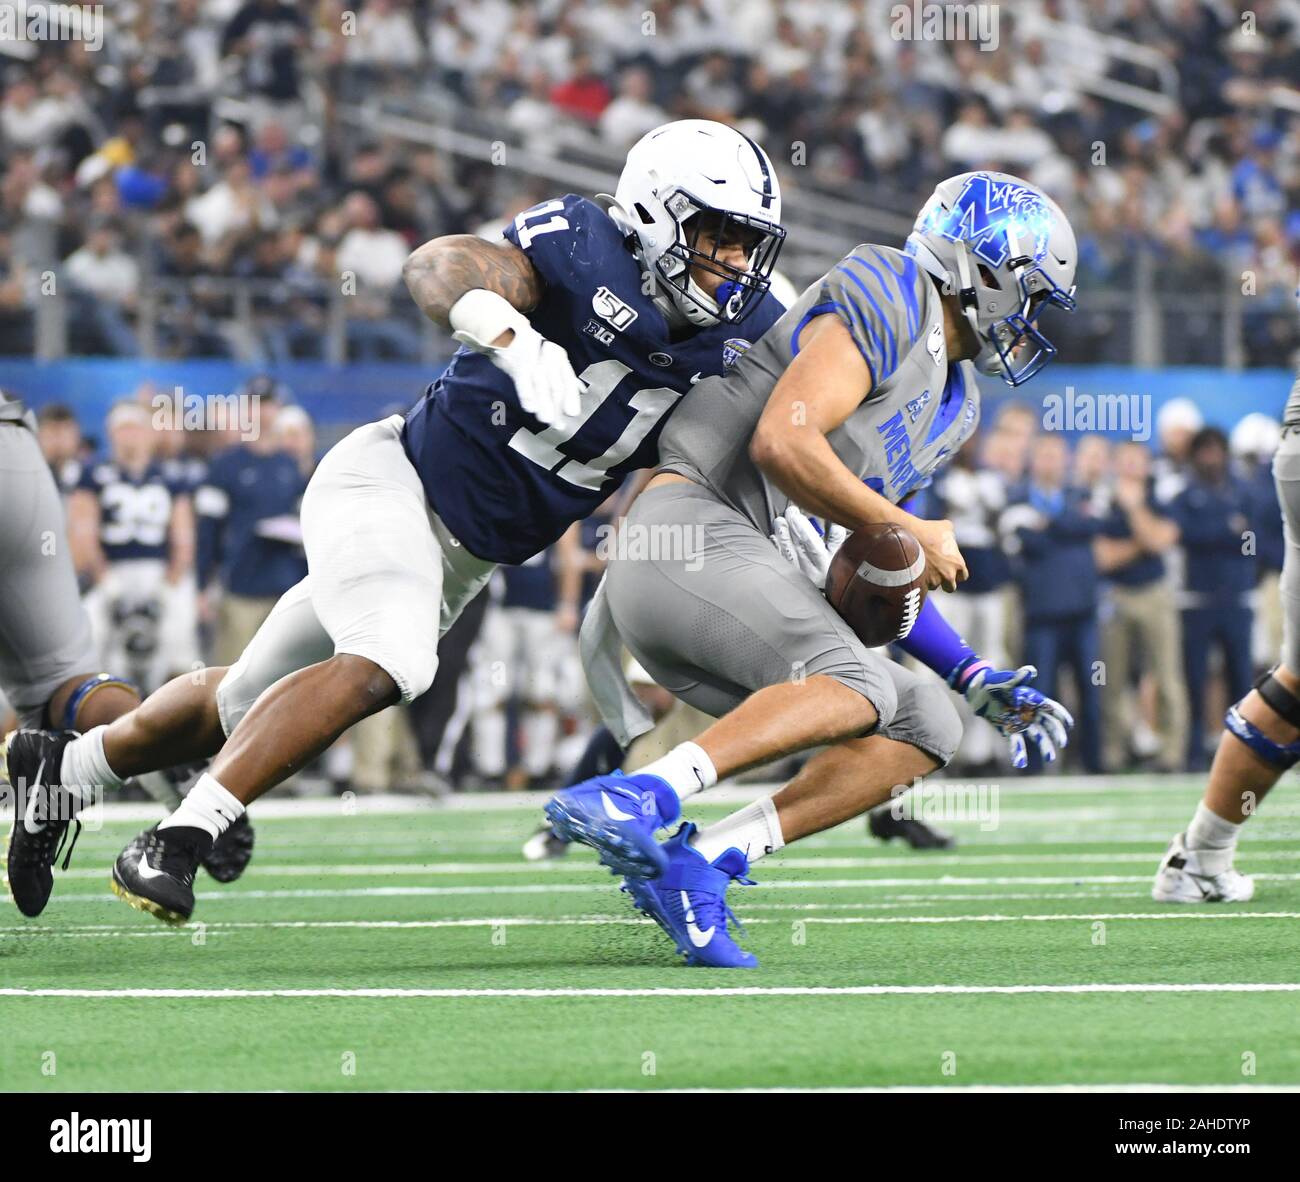 Arlington, United States. 28th Dec, 2019. Penn States Micah Parsons sacks Memphis Tigers quarterback Brady White during the first half of the 84th Goodyear Cotton Bowl Classic on Saturday, December 28, 2019 at AT&T Stadium. Photo by Ian Halperin/UPI Credit: UPI/Alamy Live News Stock Photo